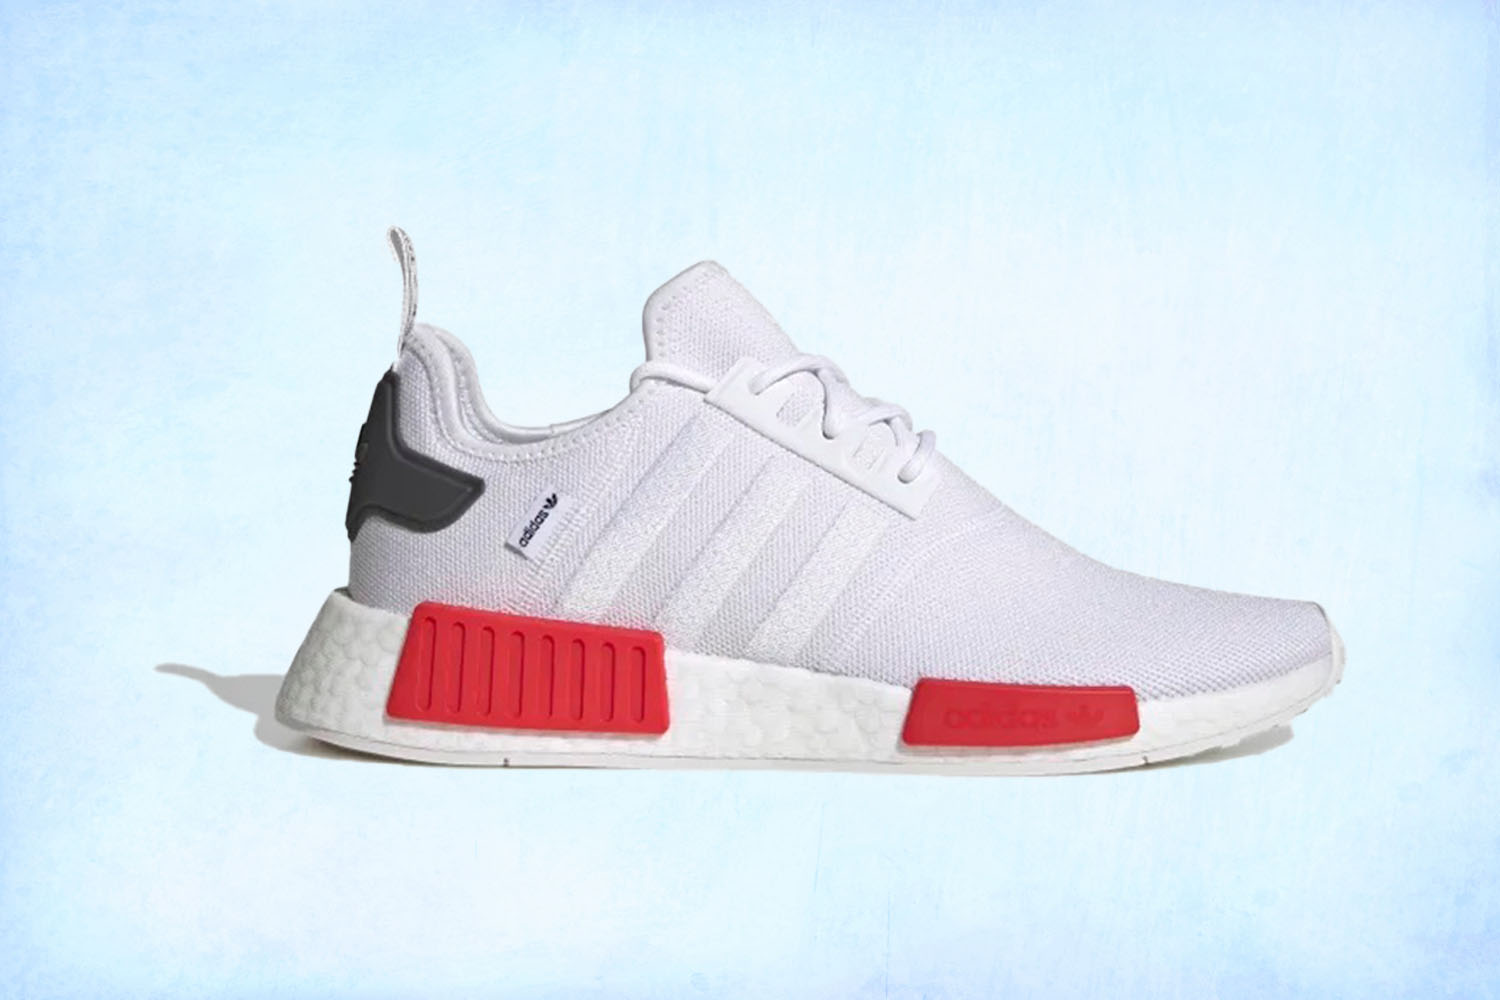 a pair of white Adidas NMD_R1 sneakers on a light blue background